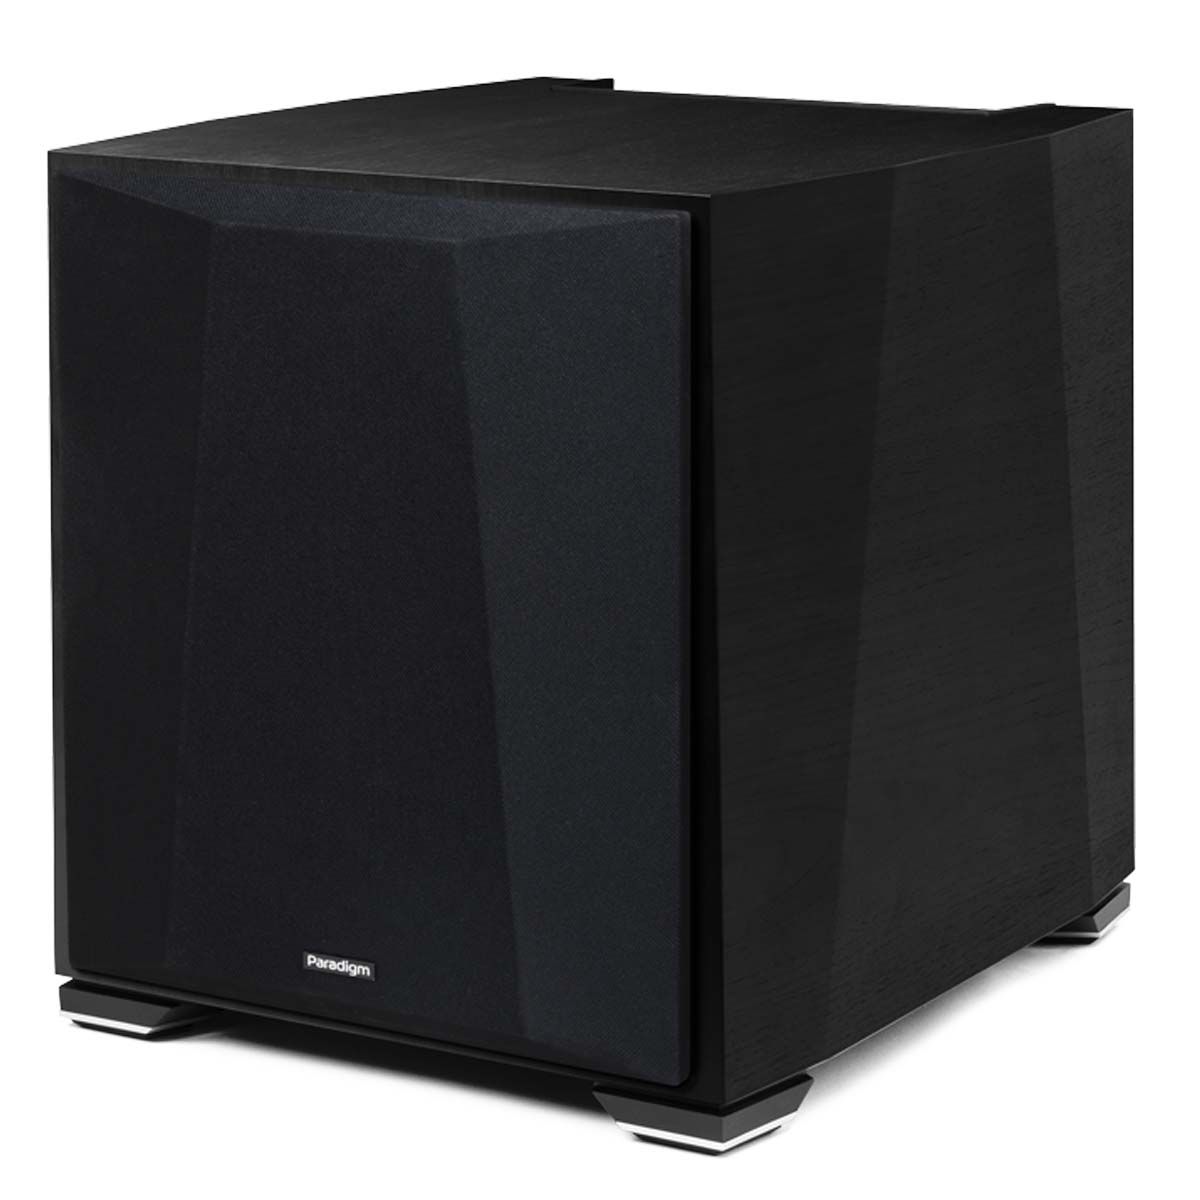 Paradigm XR13 Subwoofer - Black Walnut angled front view with grille